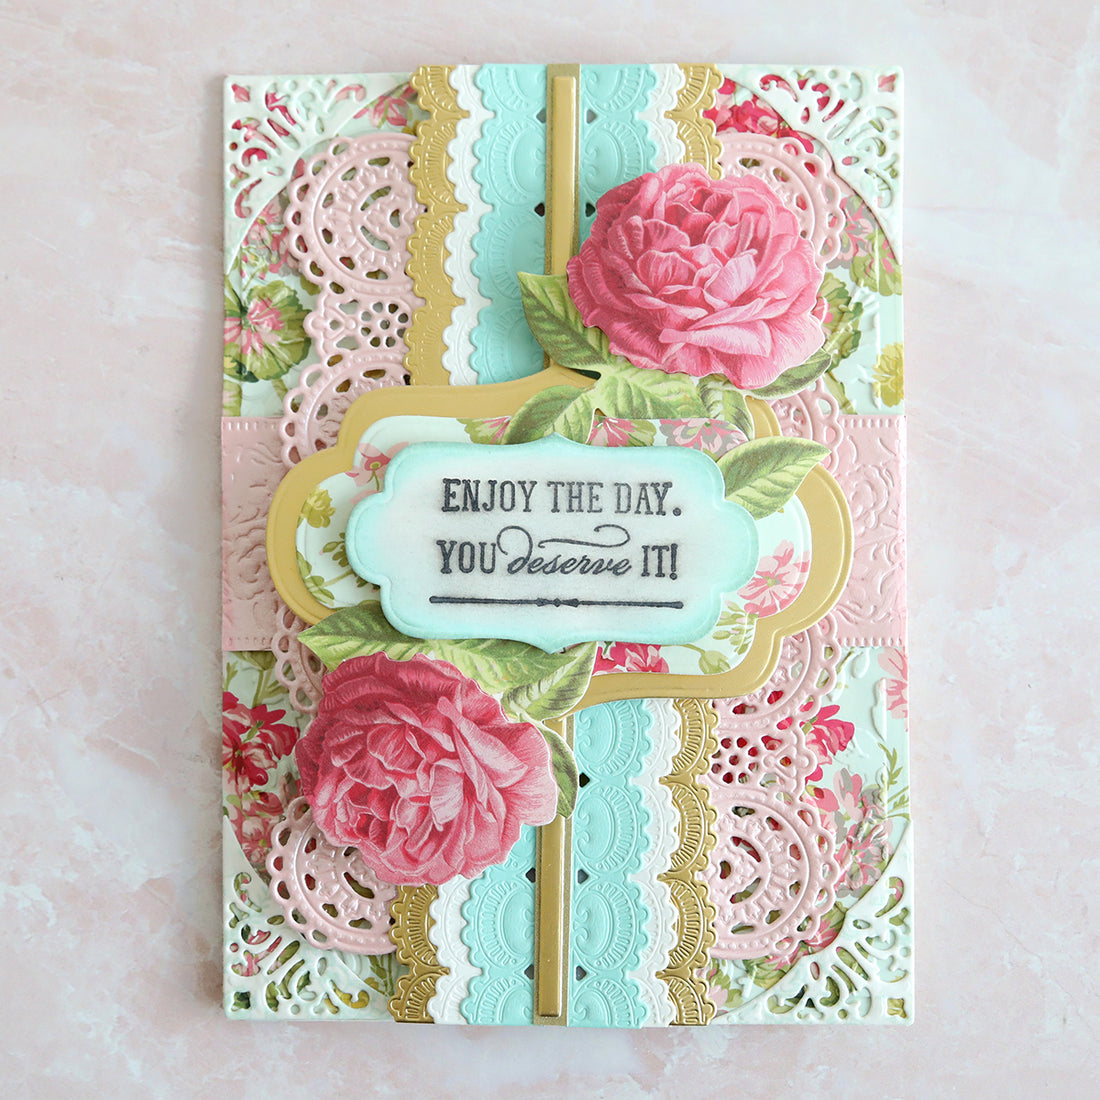 Colorful, floral card with lacy details